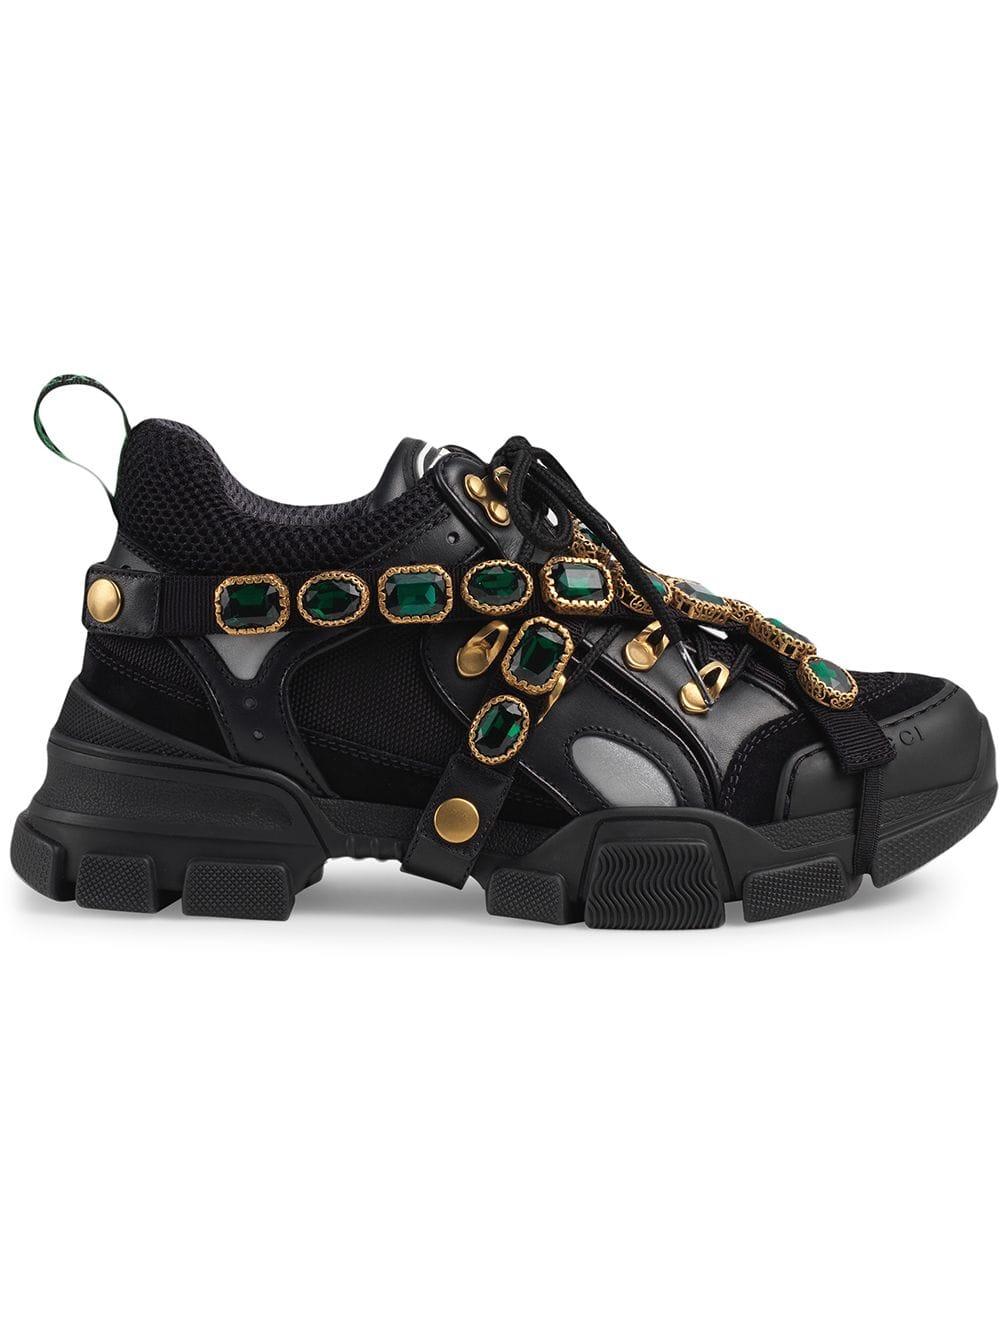 Gucci Flashtrek Sneakers With Removable Crystals in Black - Lyst